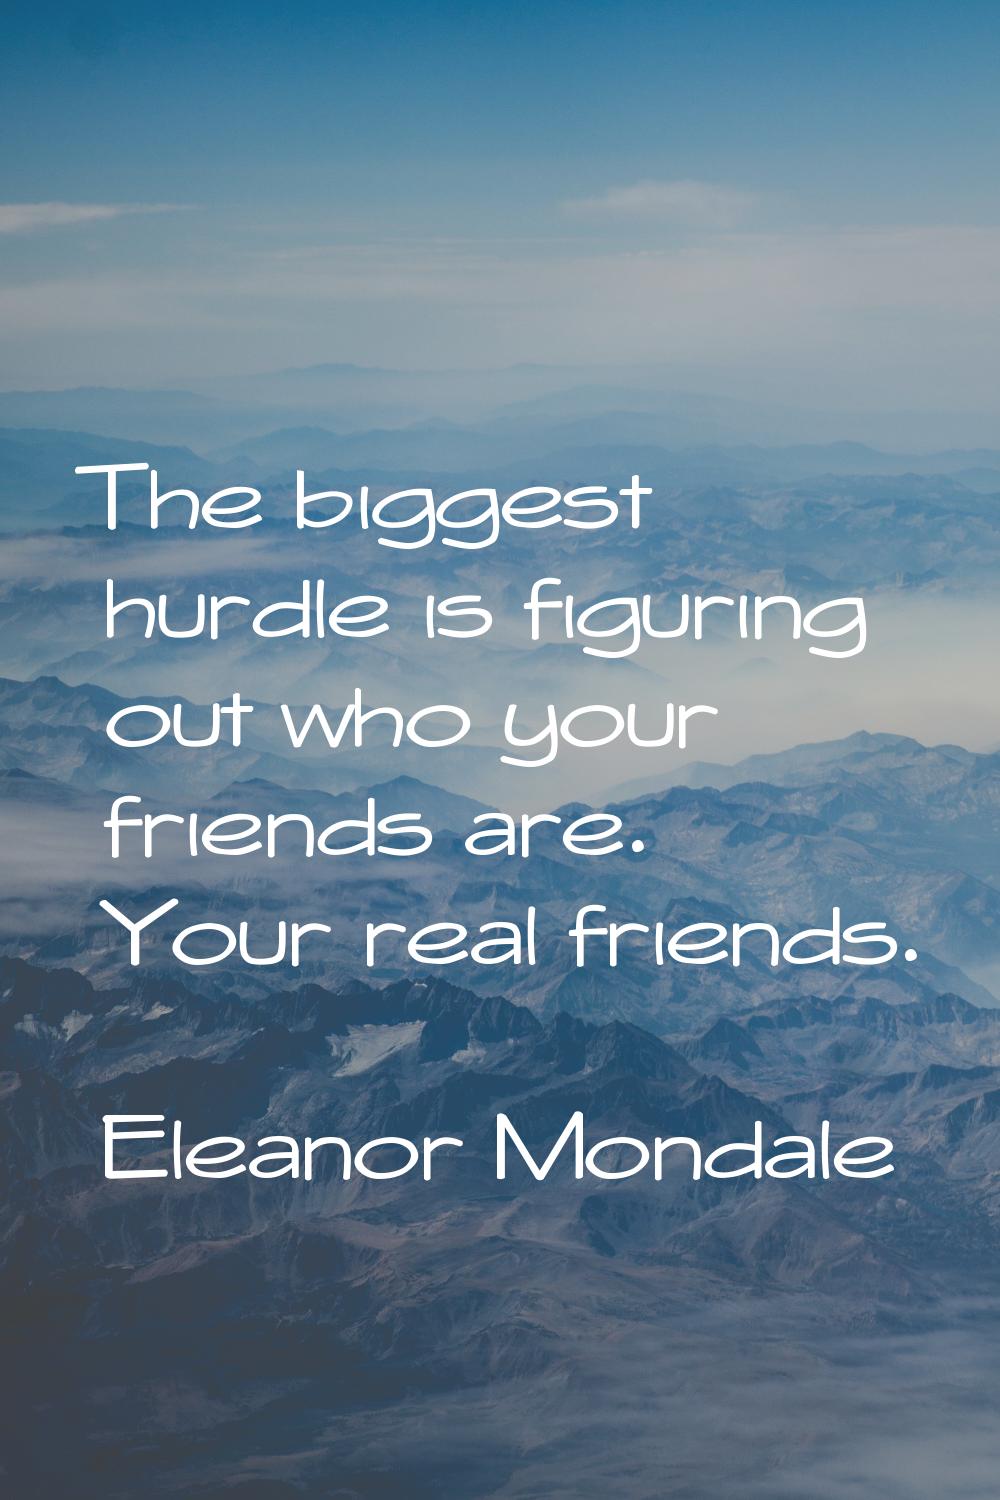 The biggest hurdle is figuring out who your friends are. Your real friends.